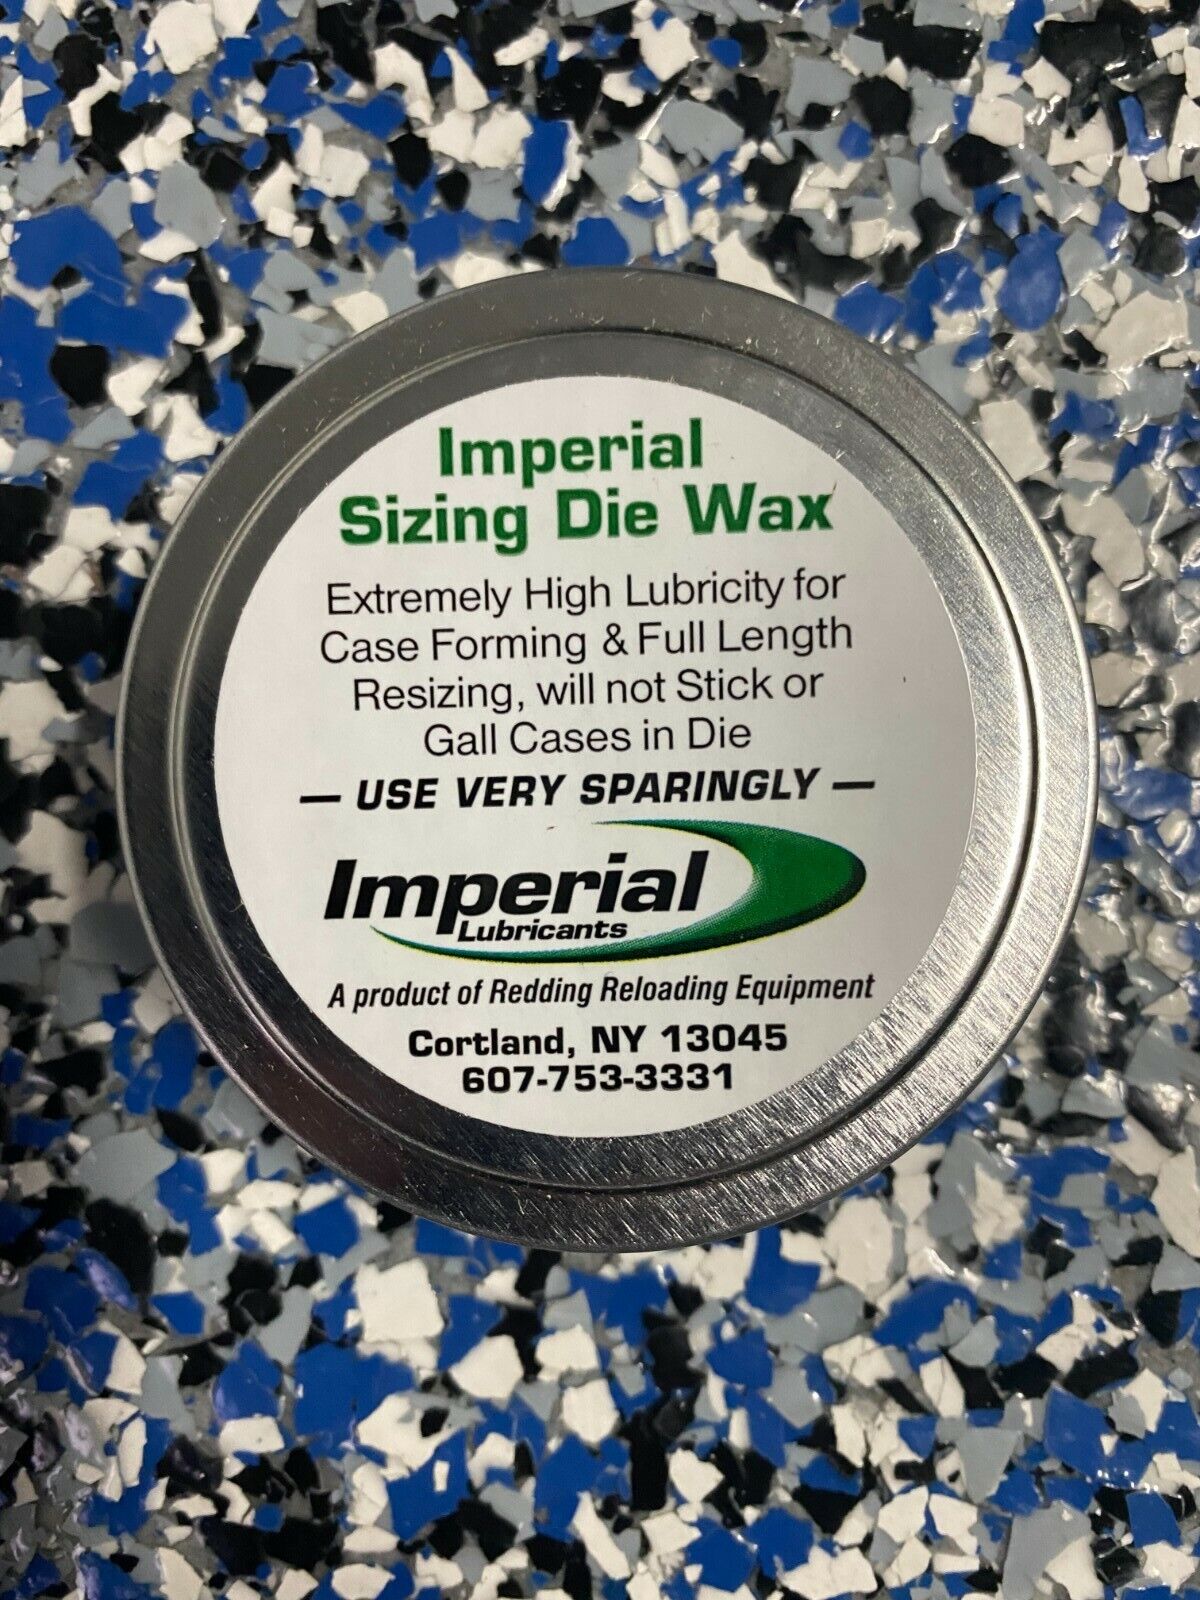 07600 REDDING IMPERIAL SIZING DIE WAX - 2 OZ TIN - BRAND NEW - FREE SHIPPING!!